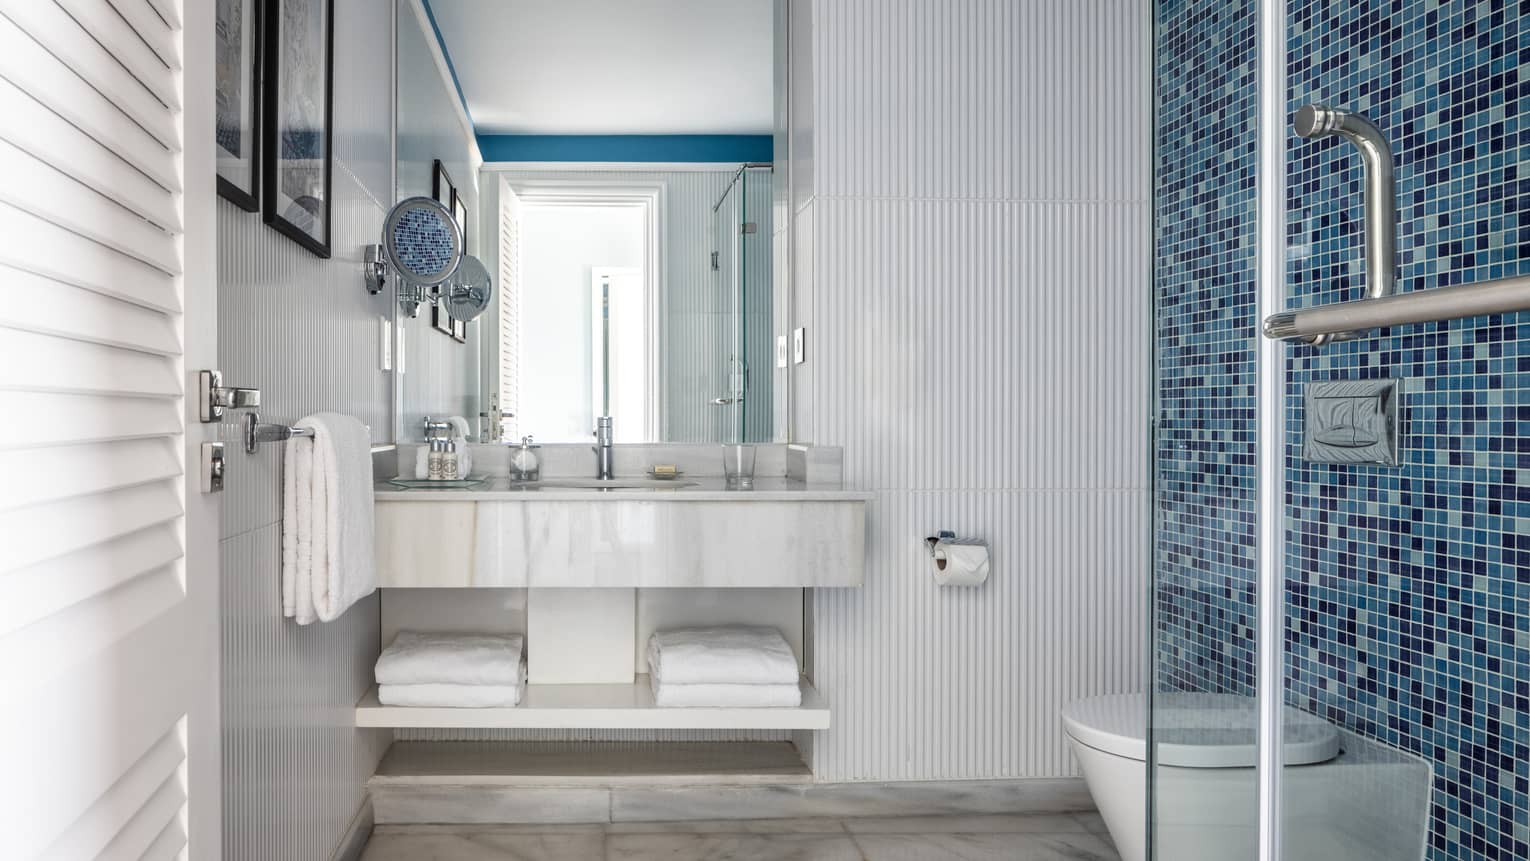 Suite bathroom with walk in shower, blue tiled wall, double vanity, mirror